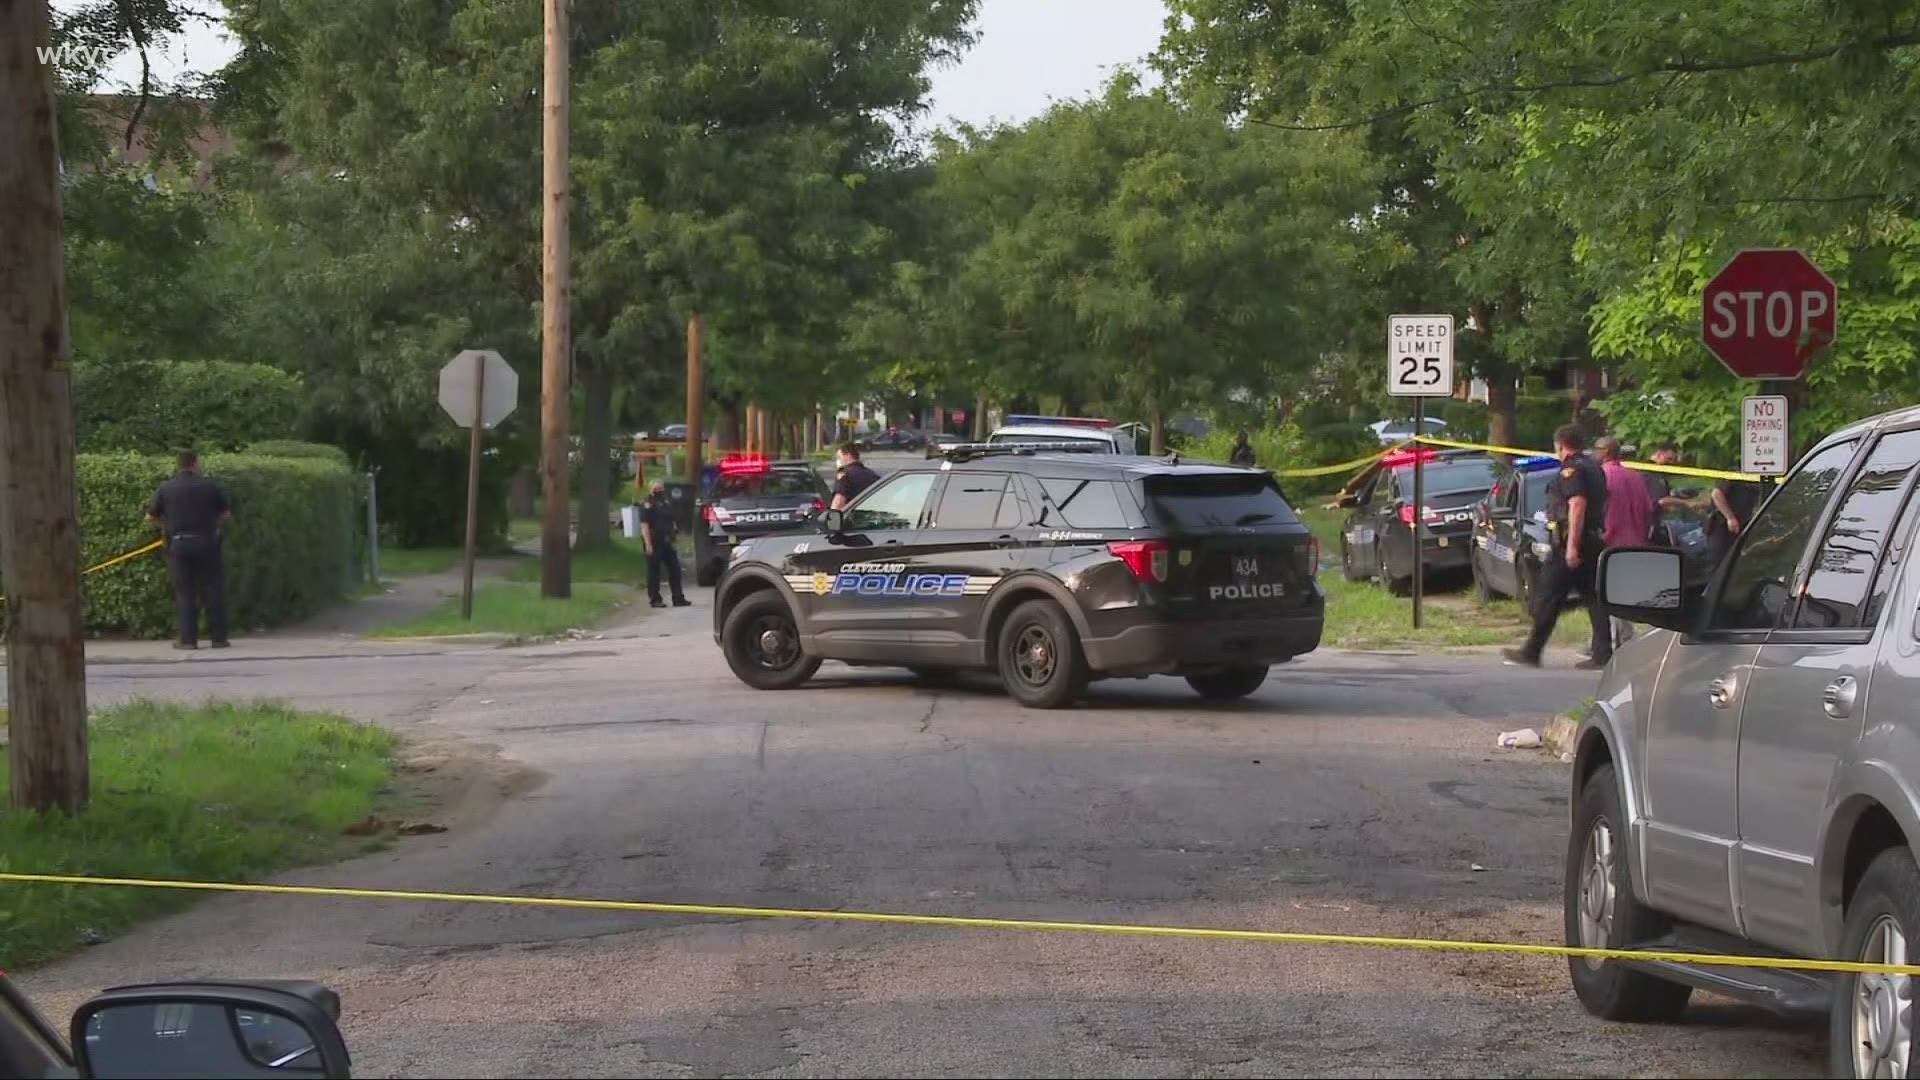 10-year-old boy in critical condition after being shot in back on Cleveland's east side